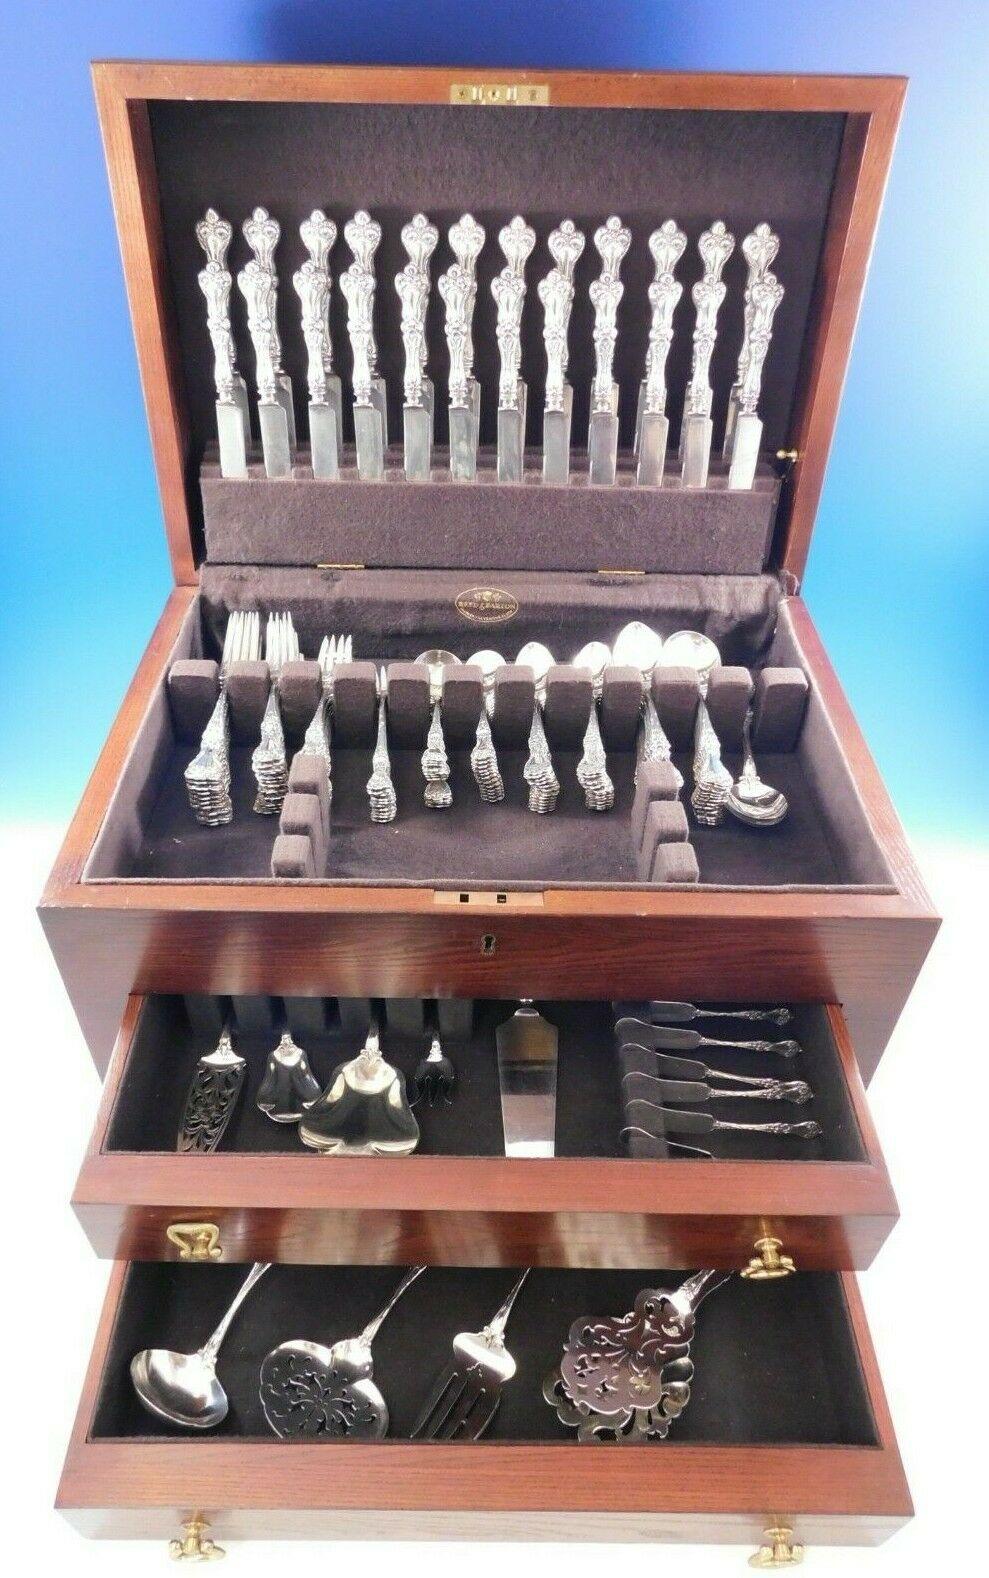 This set includes:

12 dinner knives, 9 7/8